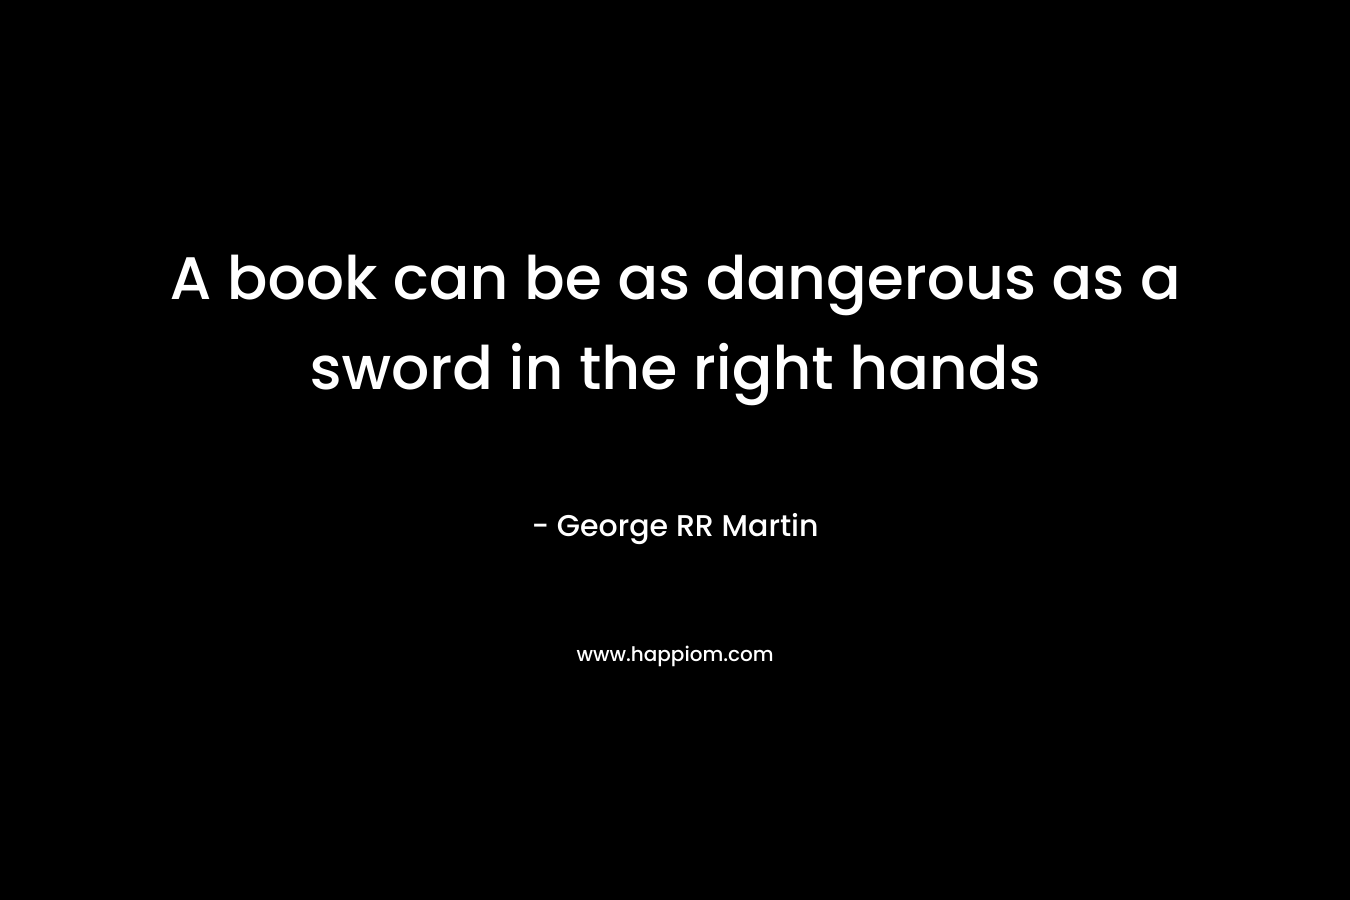 A book can be as dangerous as a sword in the right hands